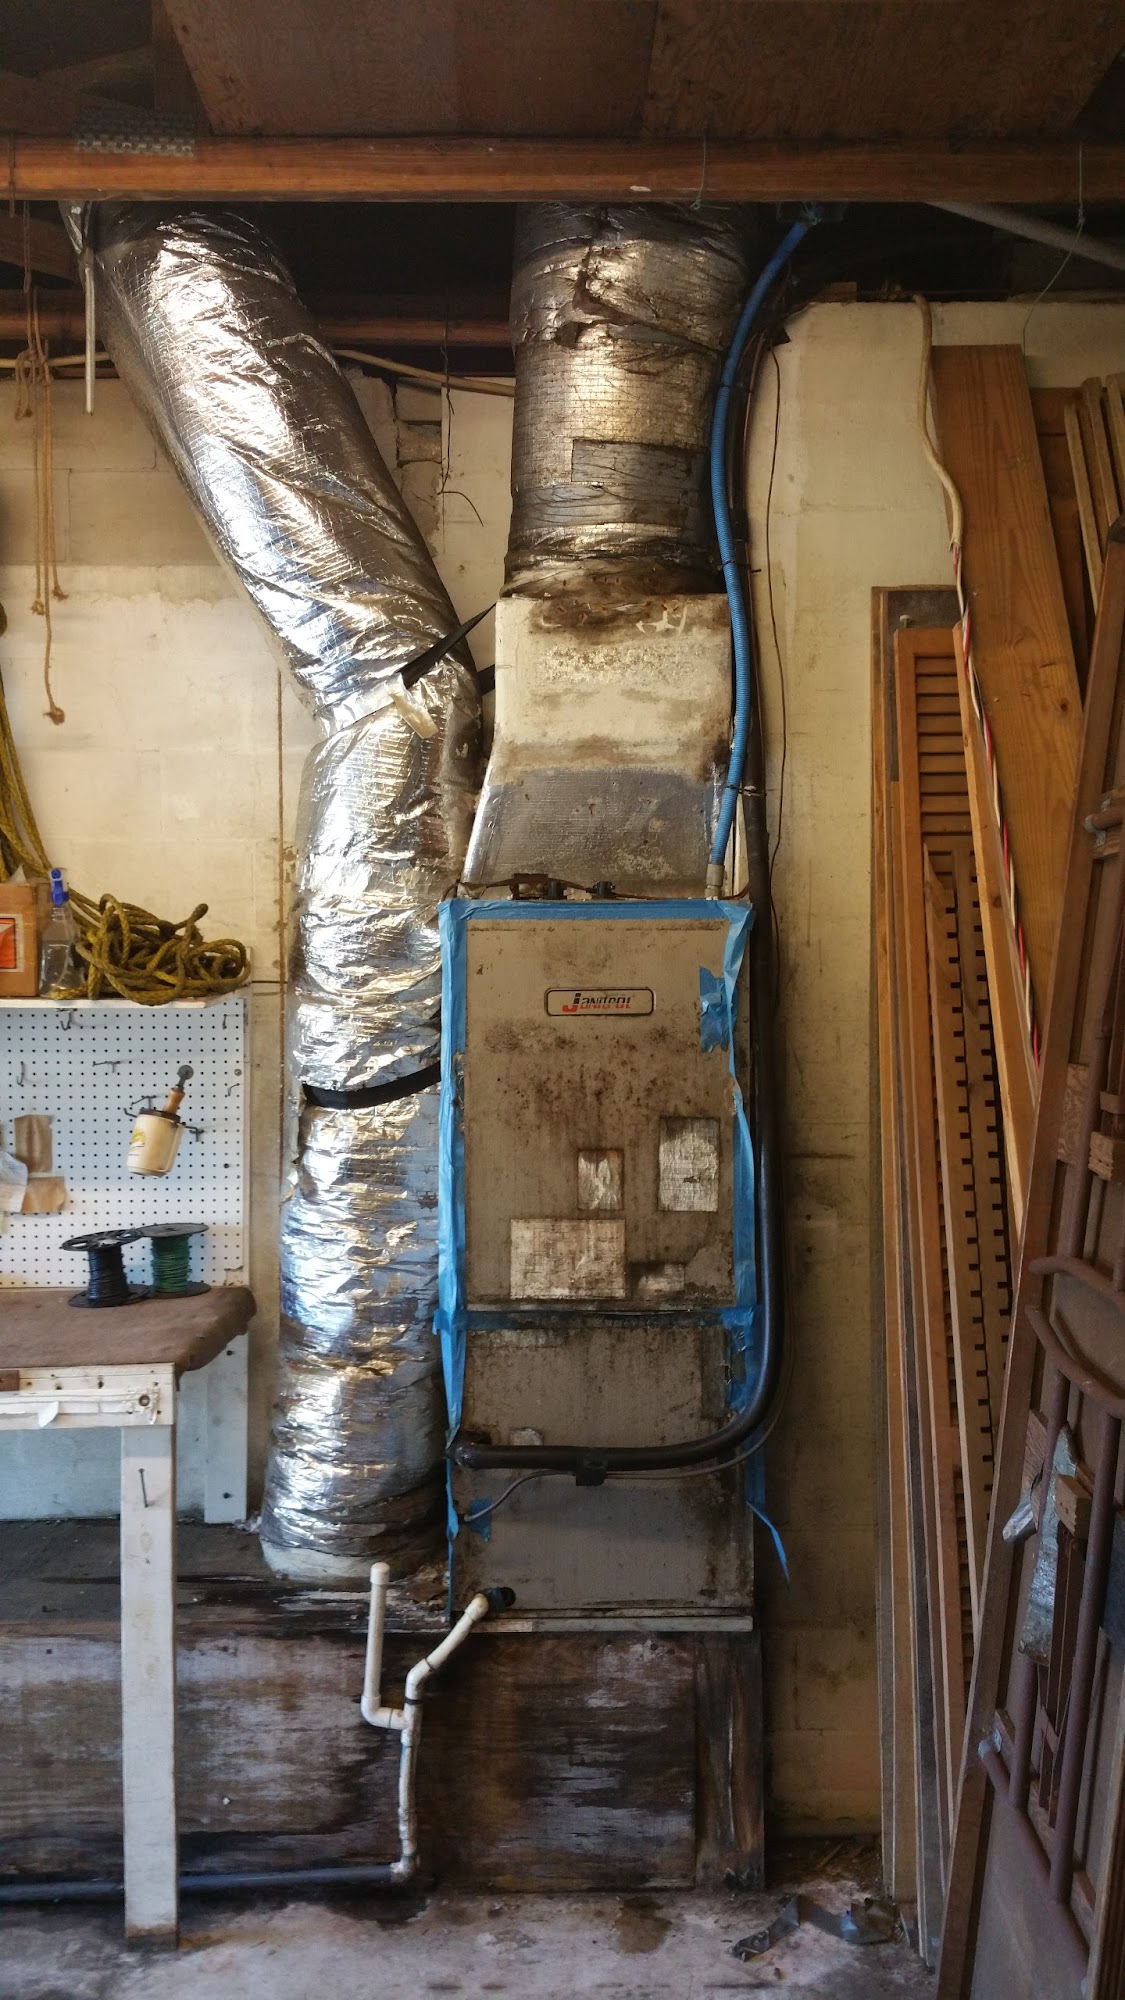 Jeff's Mid Florida Heating & Air Conditioning Inc